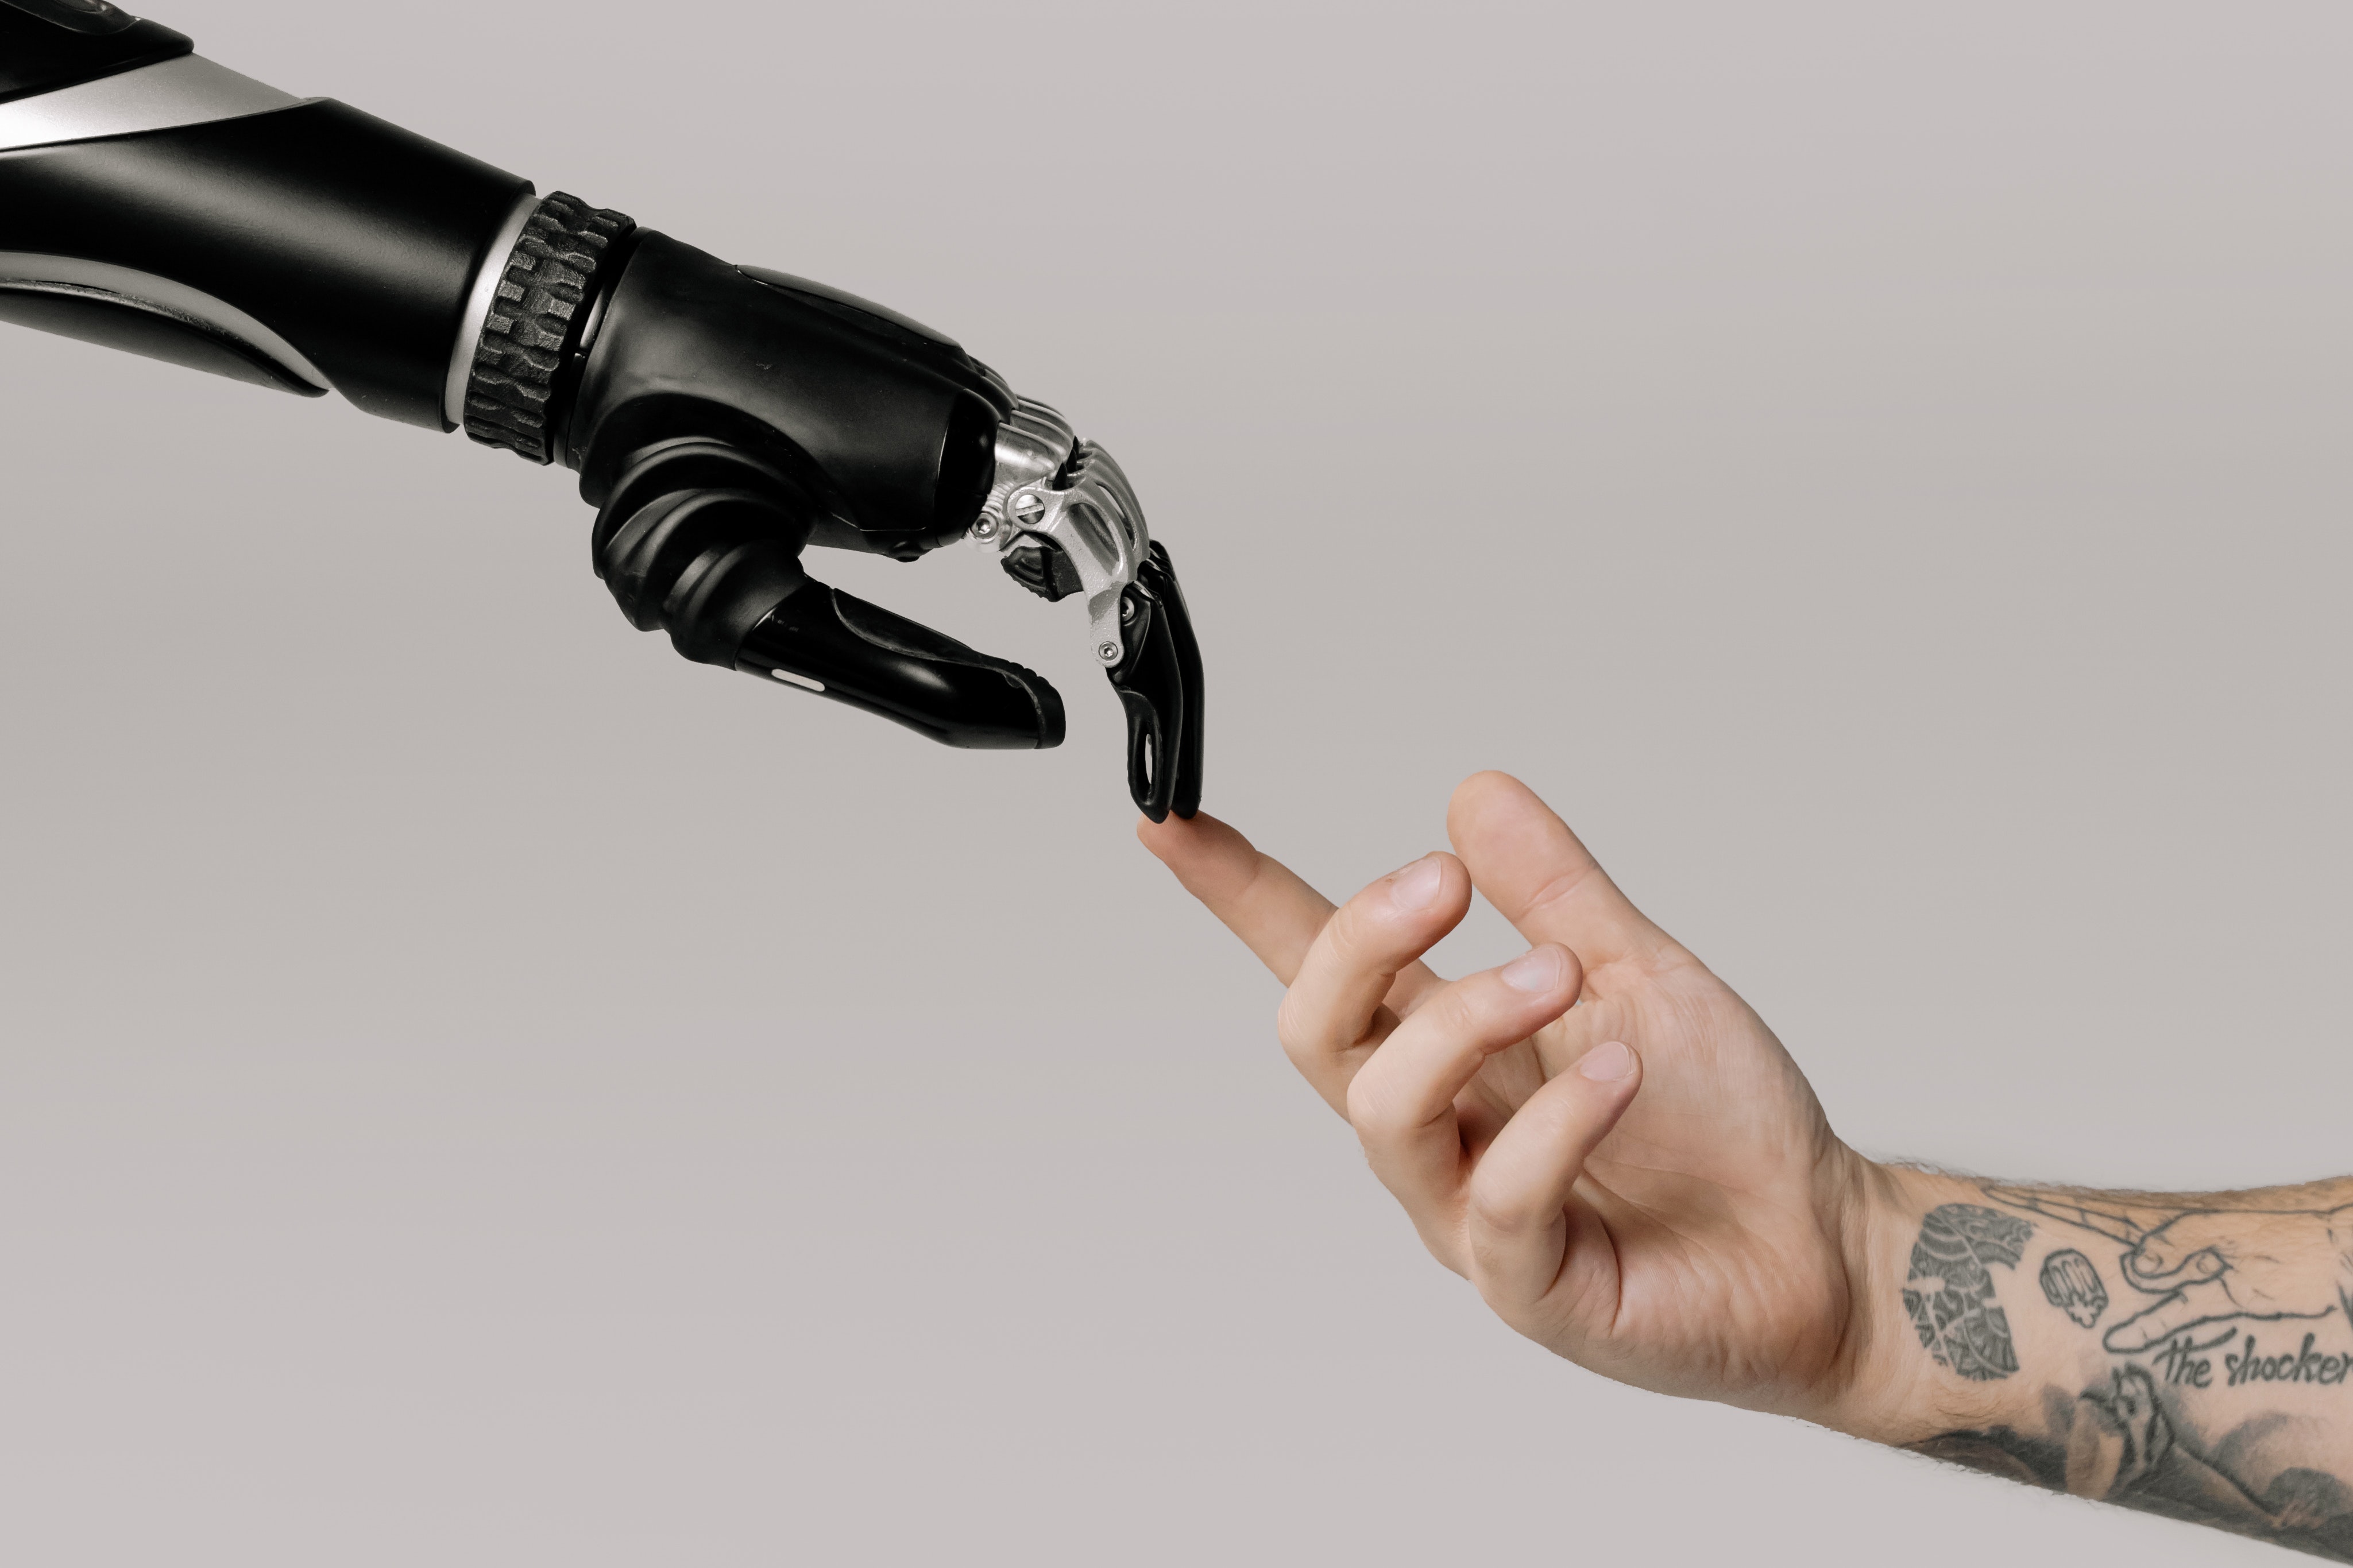 a man with a tattoo on his arm is touching his index finger to the index finger of a robot